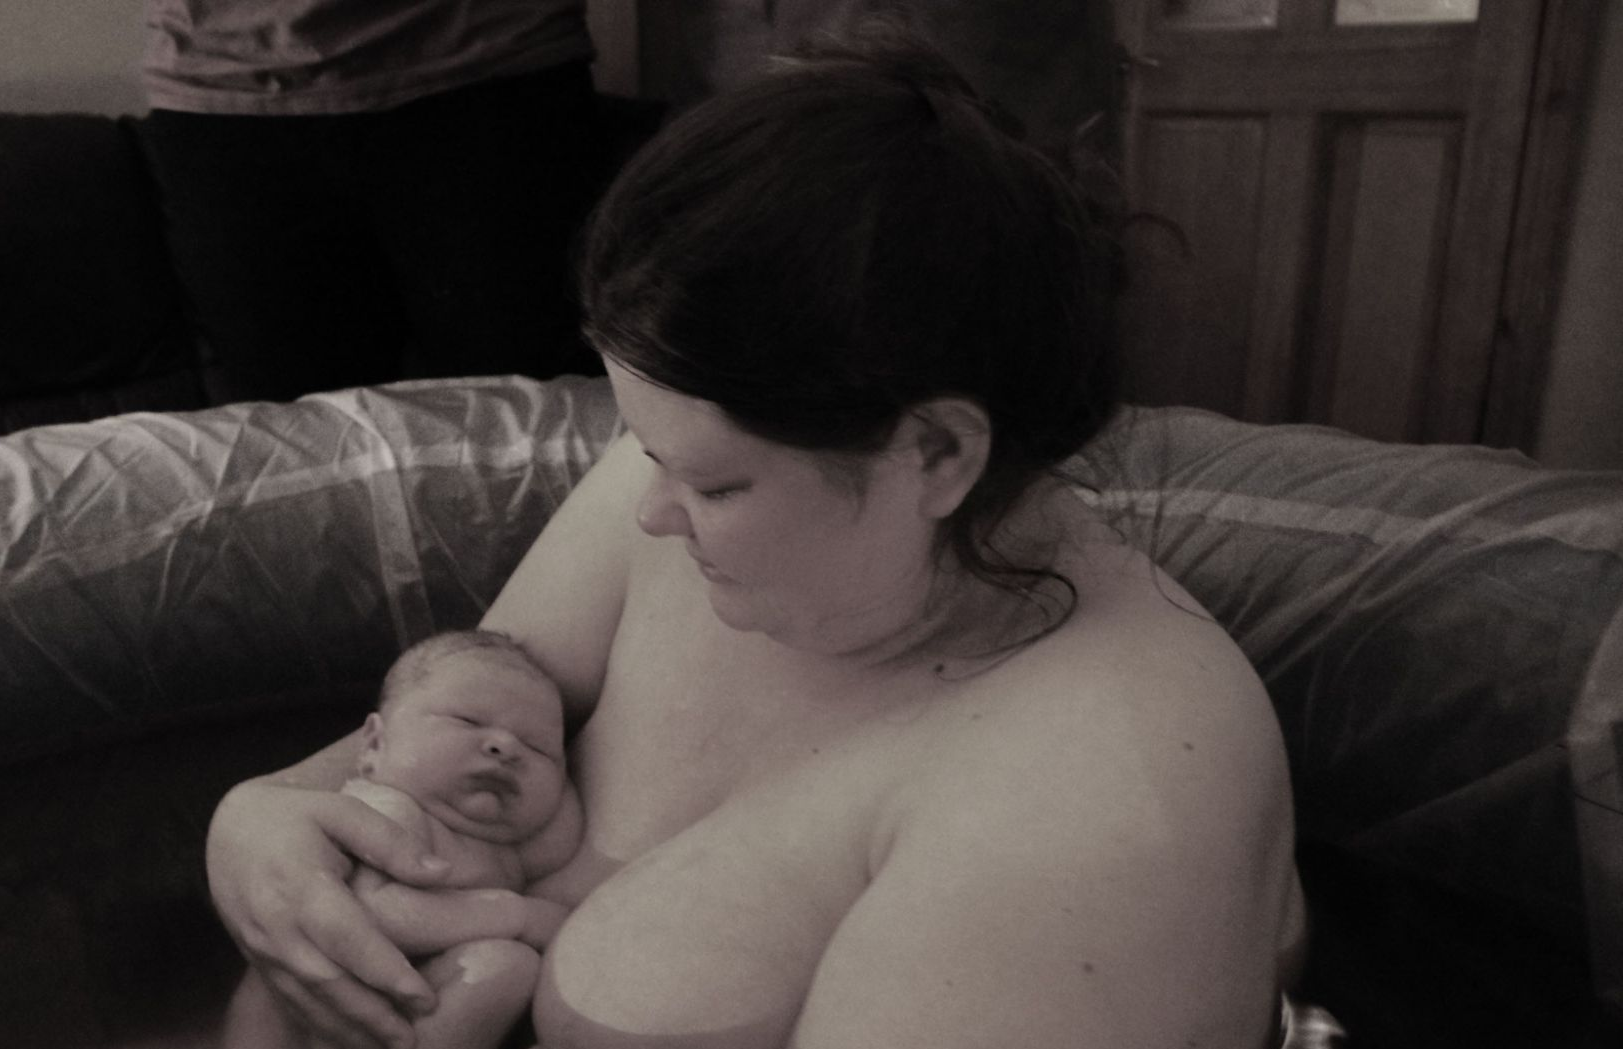 Image of a woman holding a newborn baby in a birth pool.